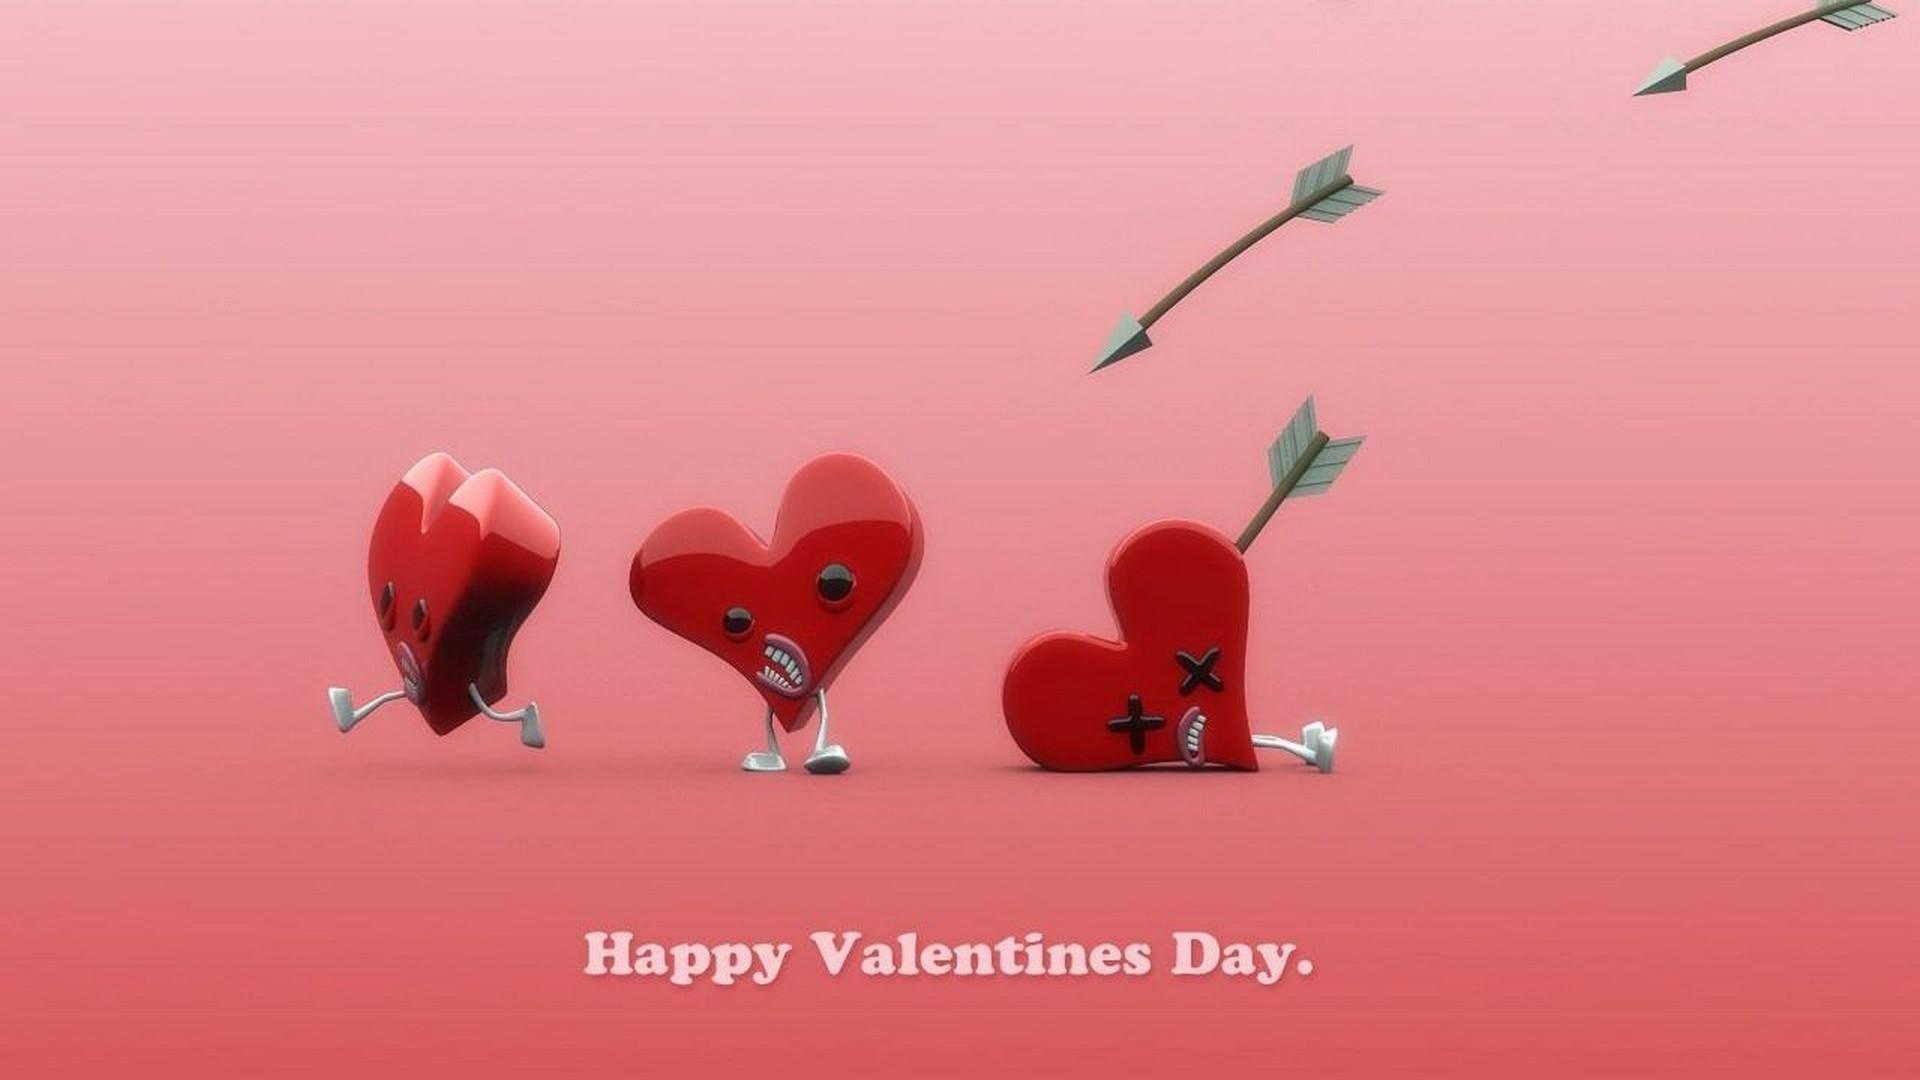 Animated Valentines Day Wallpaper Cute Wallpaper